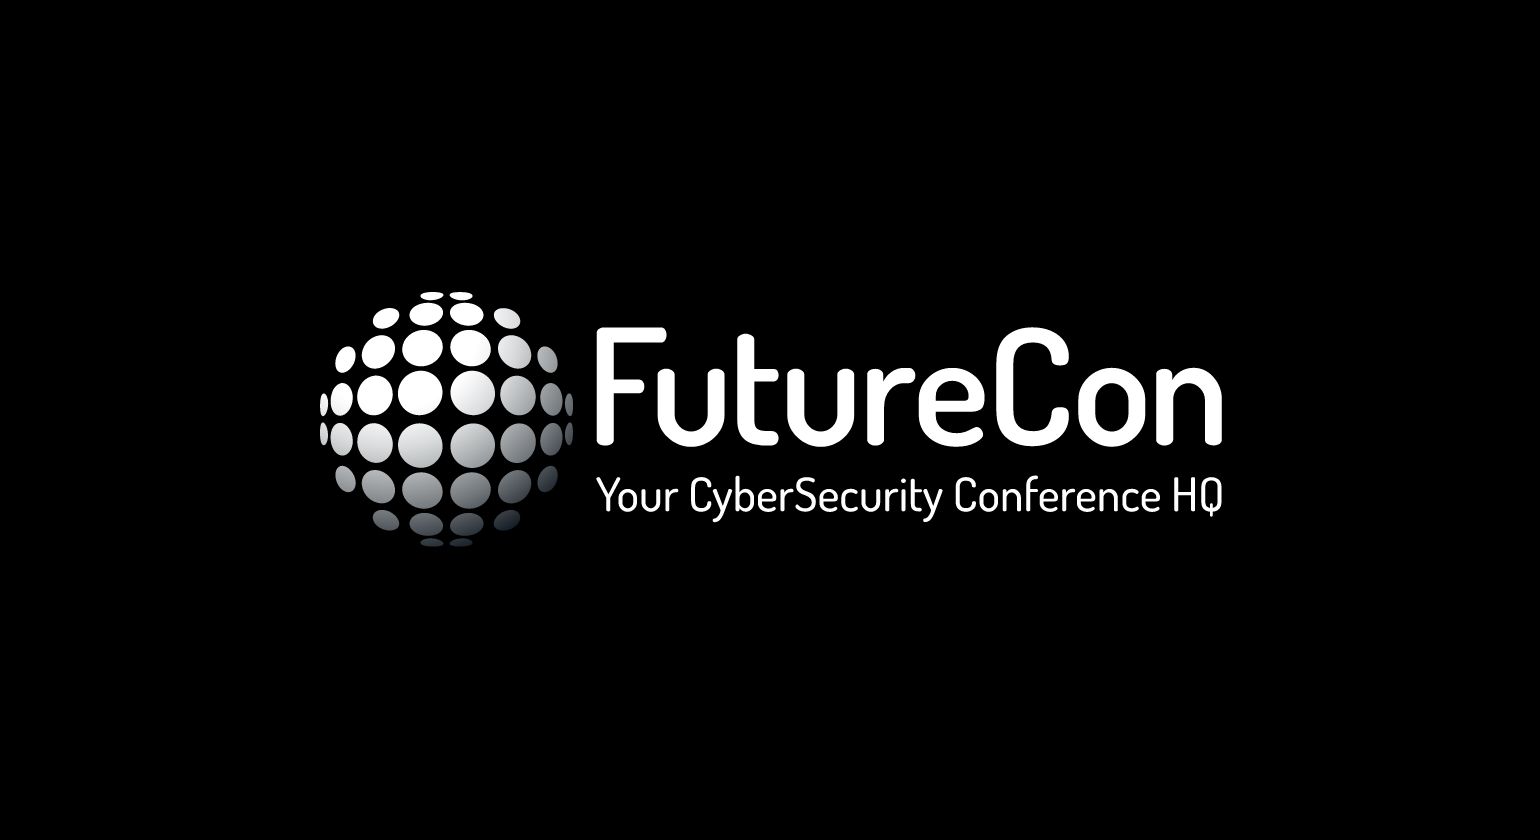 FutureCon: Your Cybersecurity Conference HQ